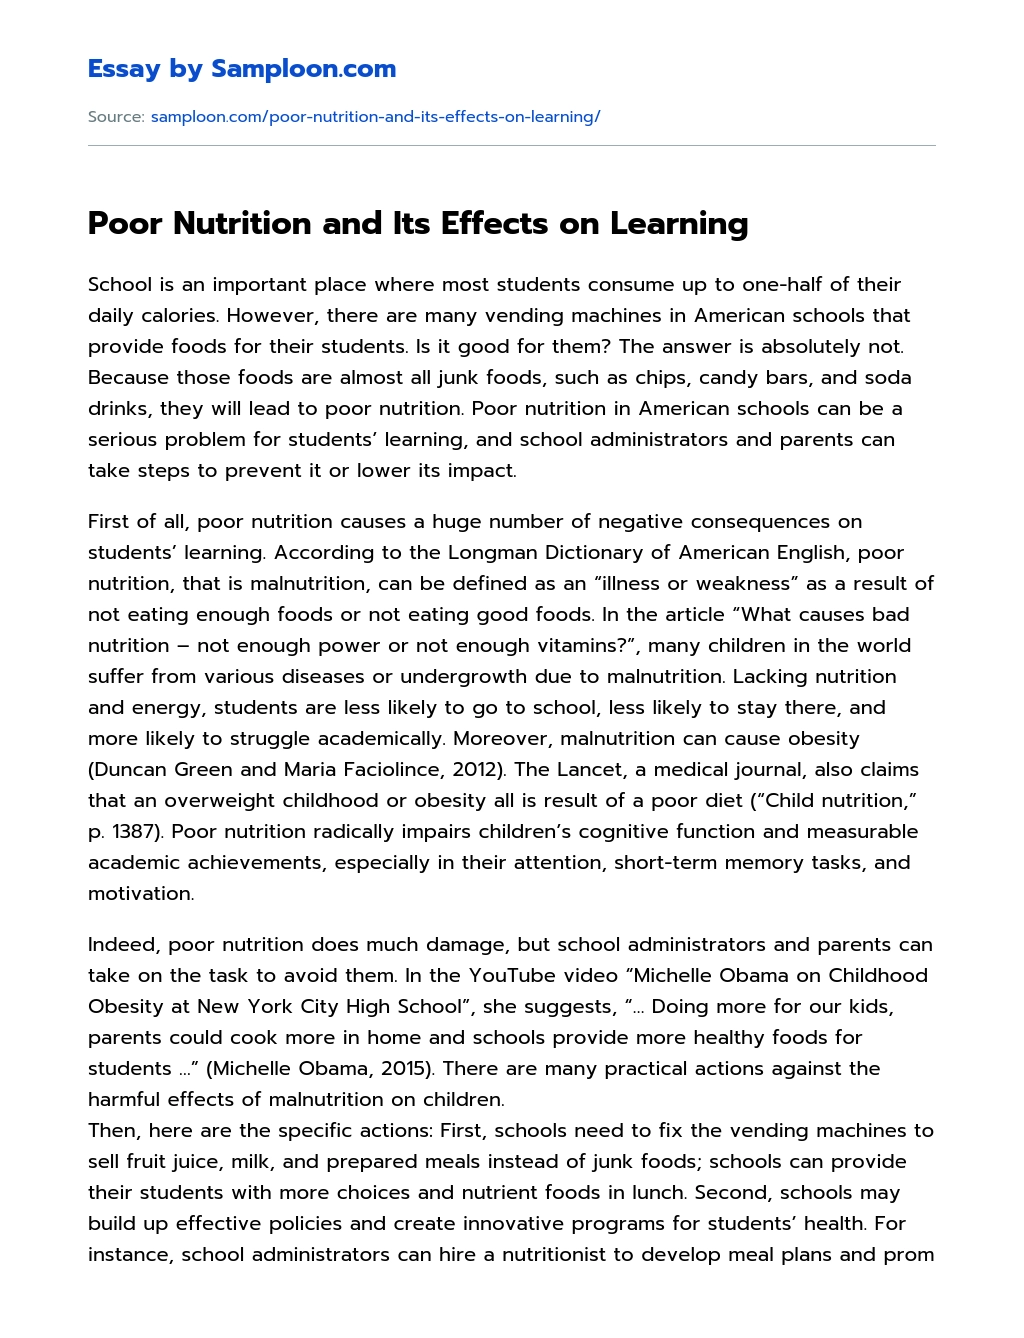 Poor Nutrition and Its Effects on Learning essay